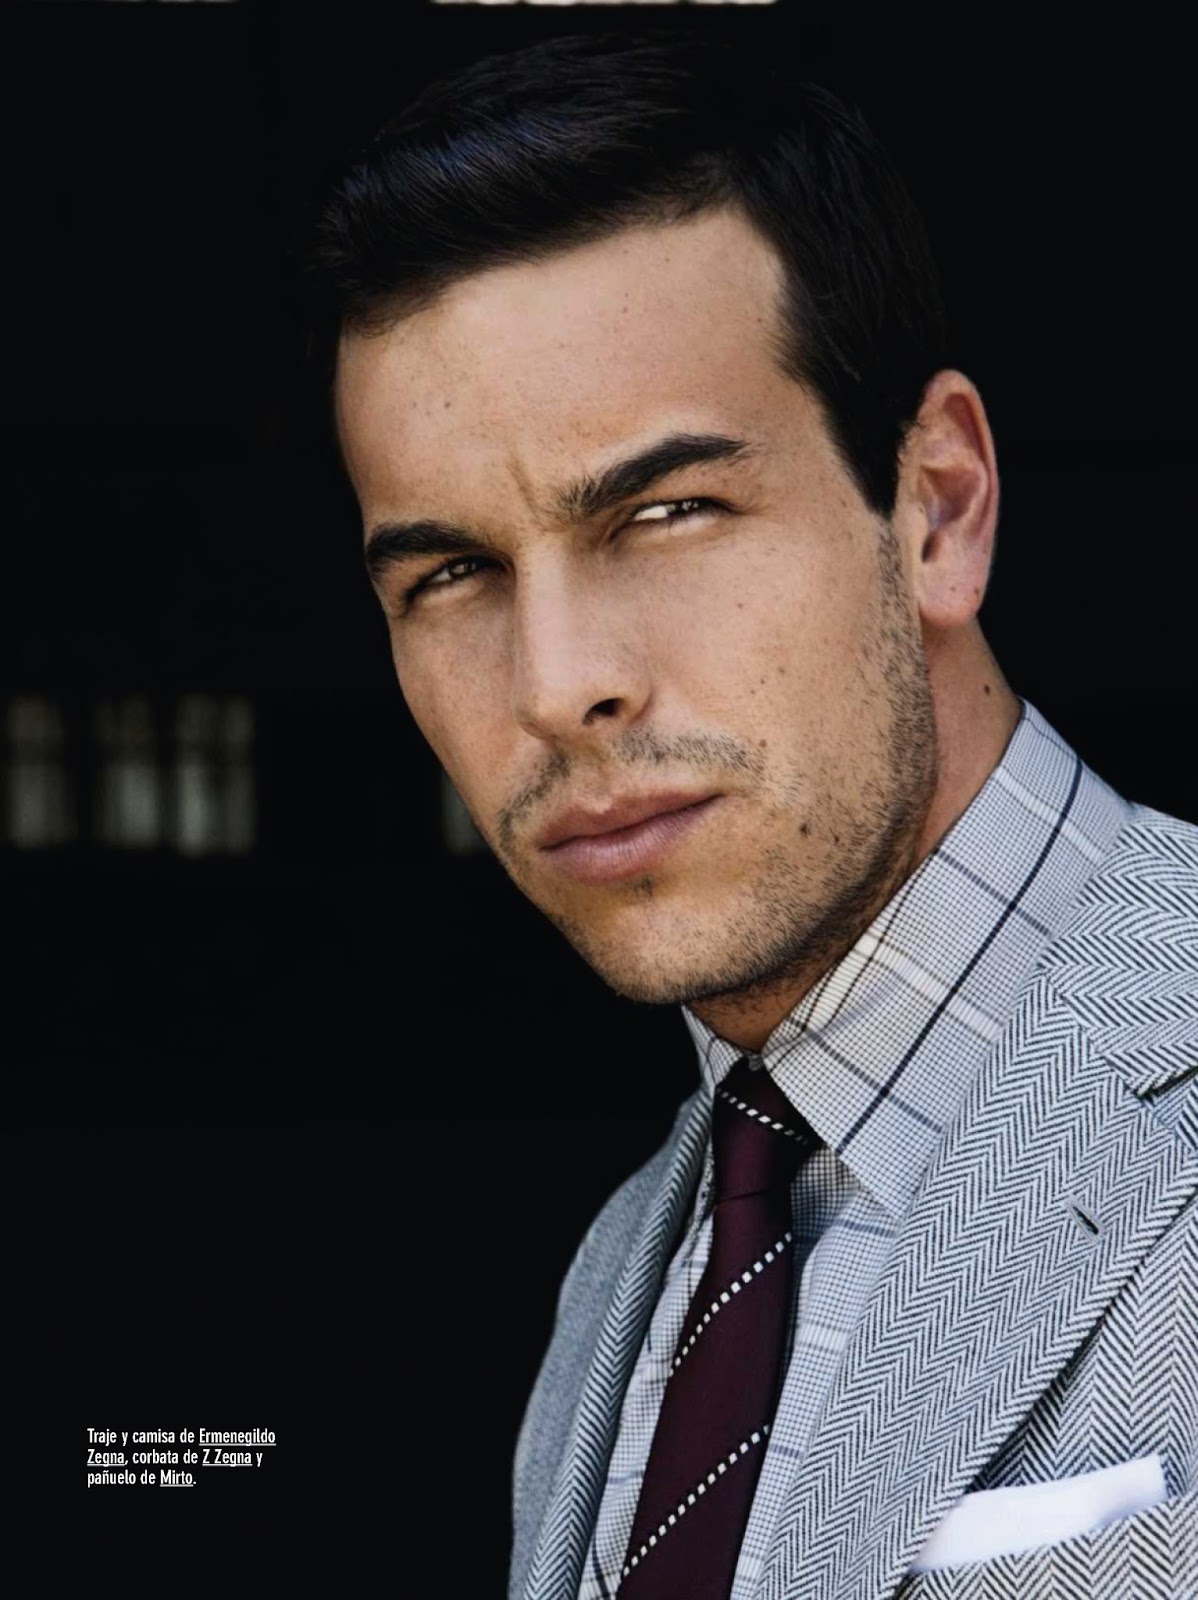 Mario casas where hi-res stock photography and images - Alamy